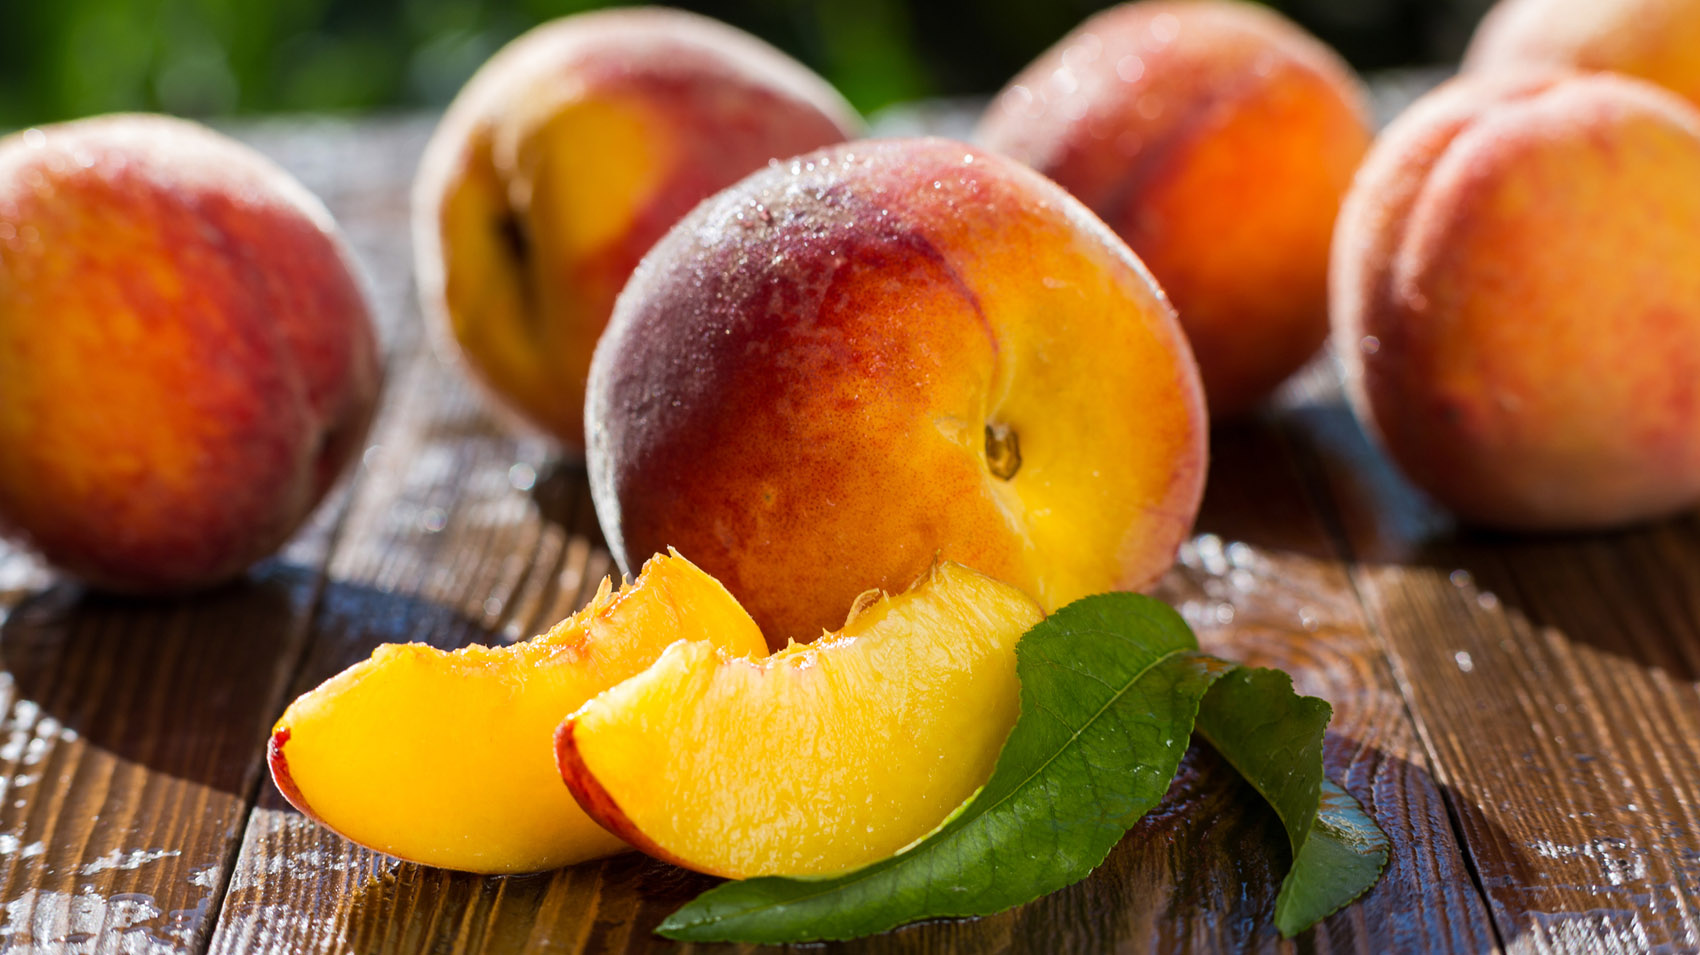 Peaches: properties and benefits and how many to eat